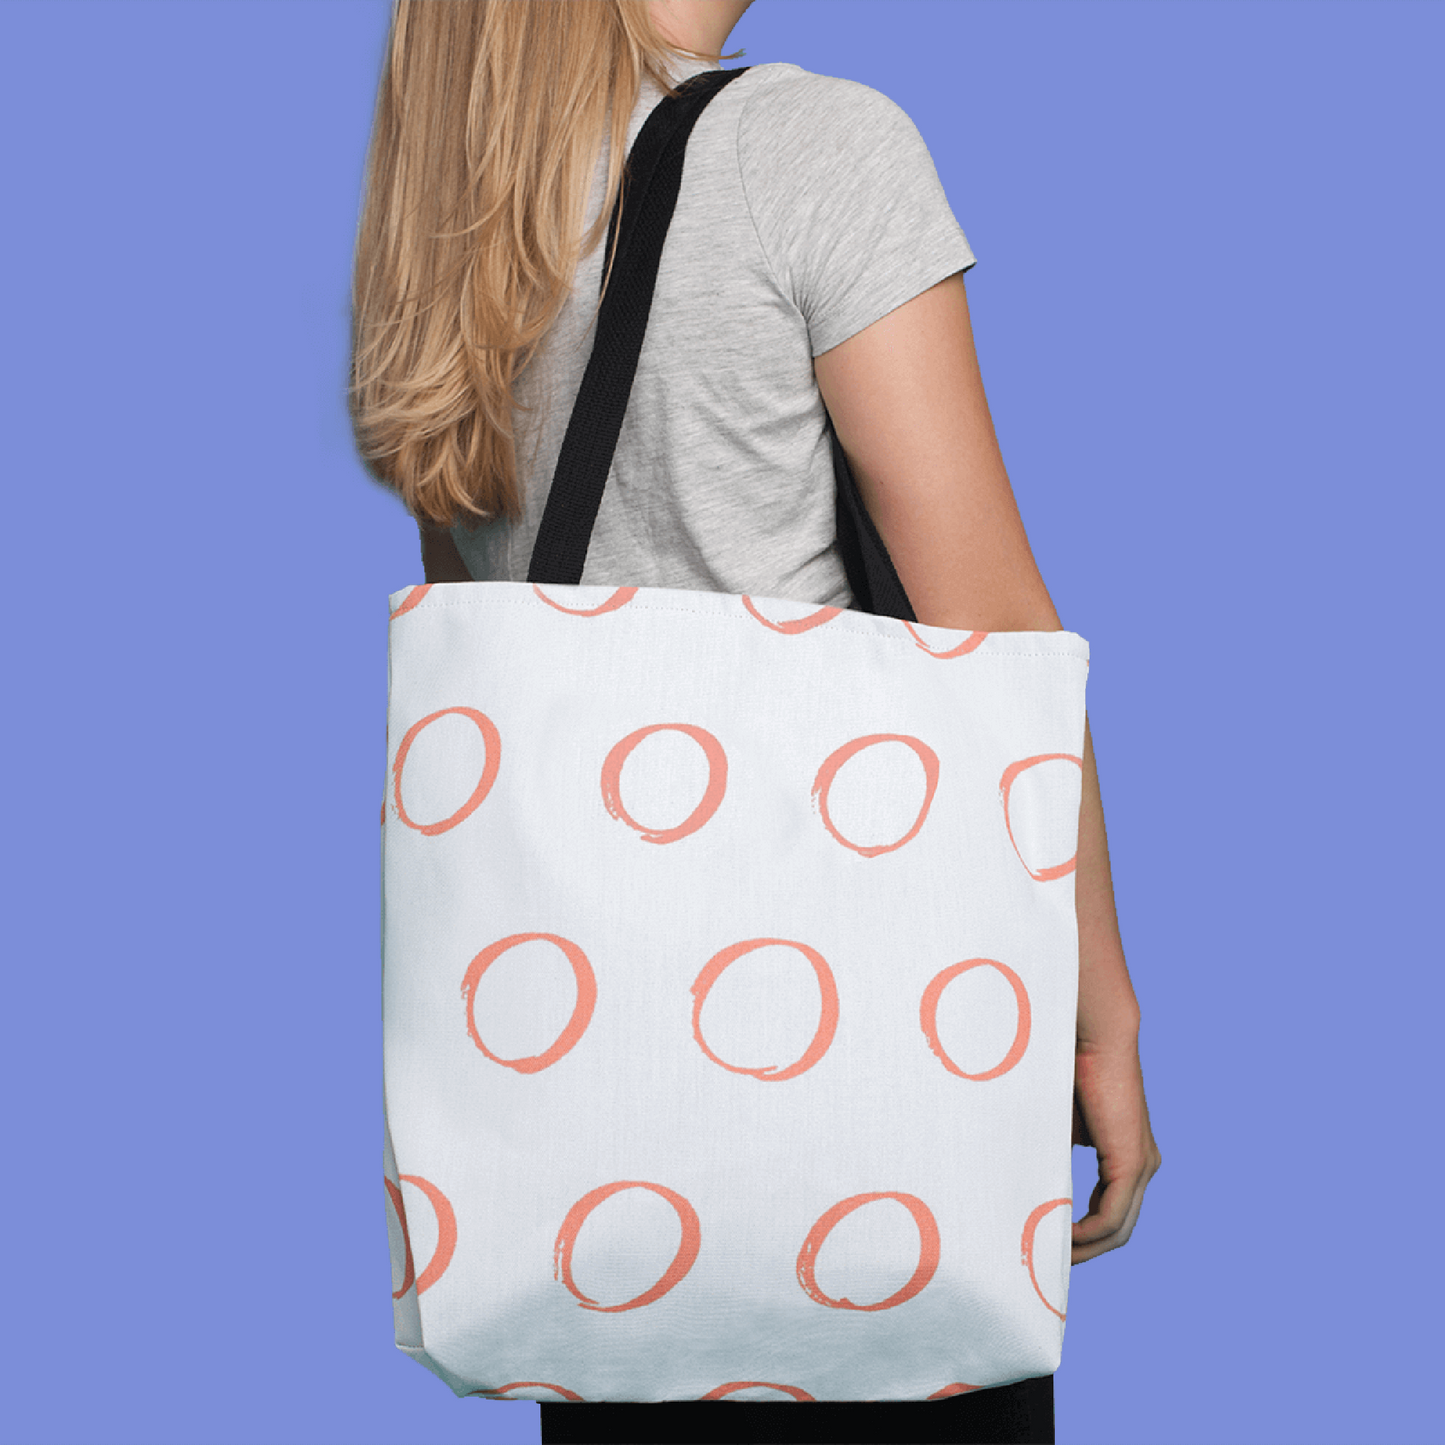 Rose Abstract Canvas Tote Bag, Weekender Bag, For Women, Unique Design Esbee